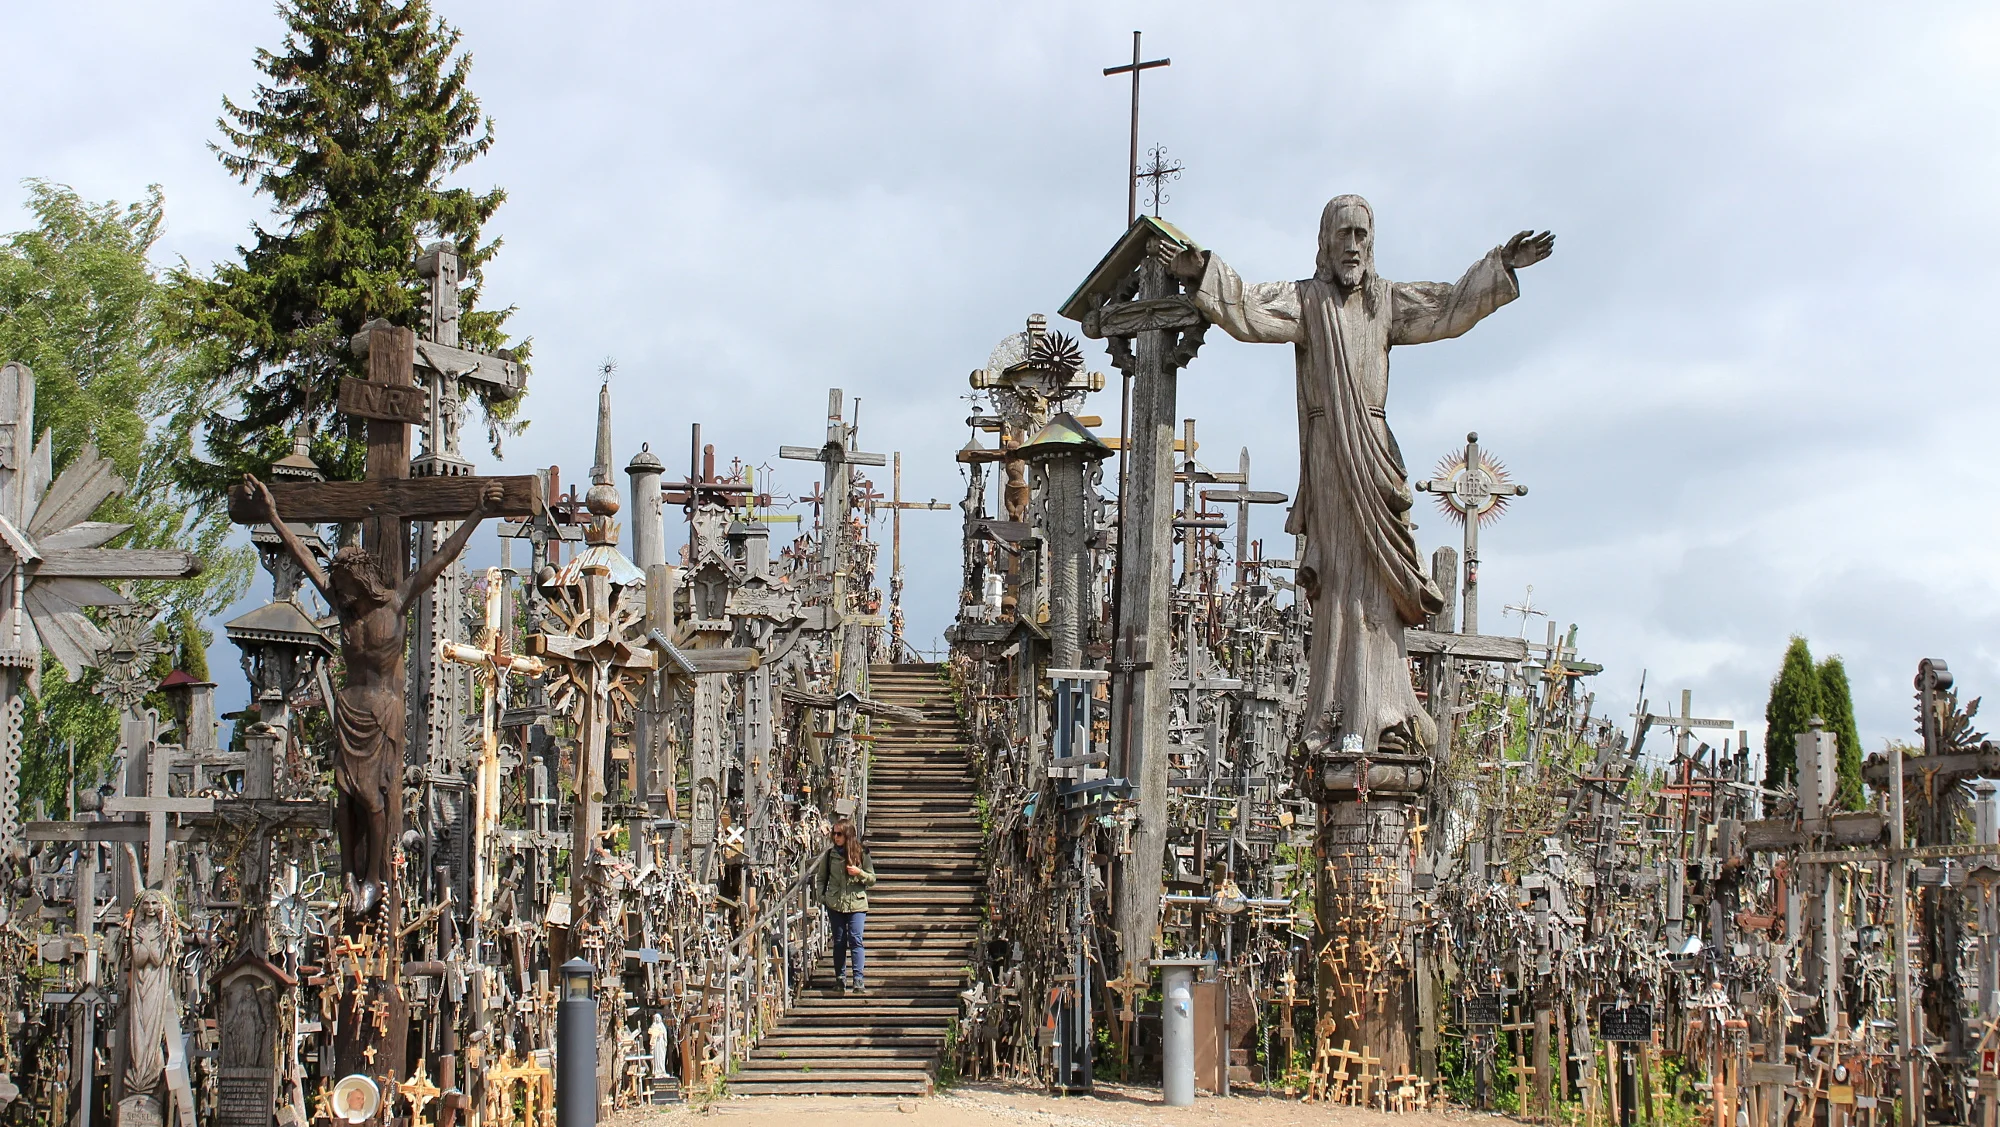 Thousands of crosses on a hill with a stairway in the middle.